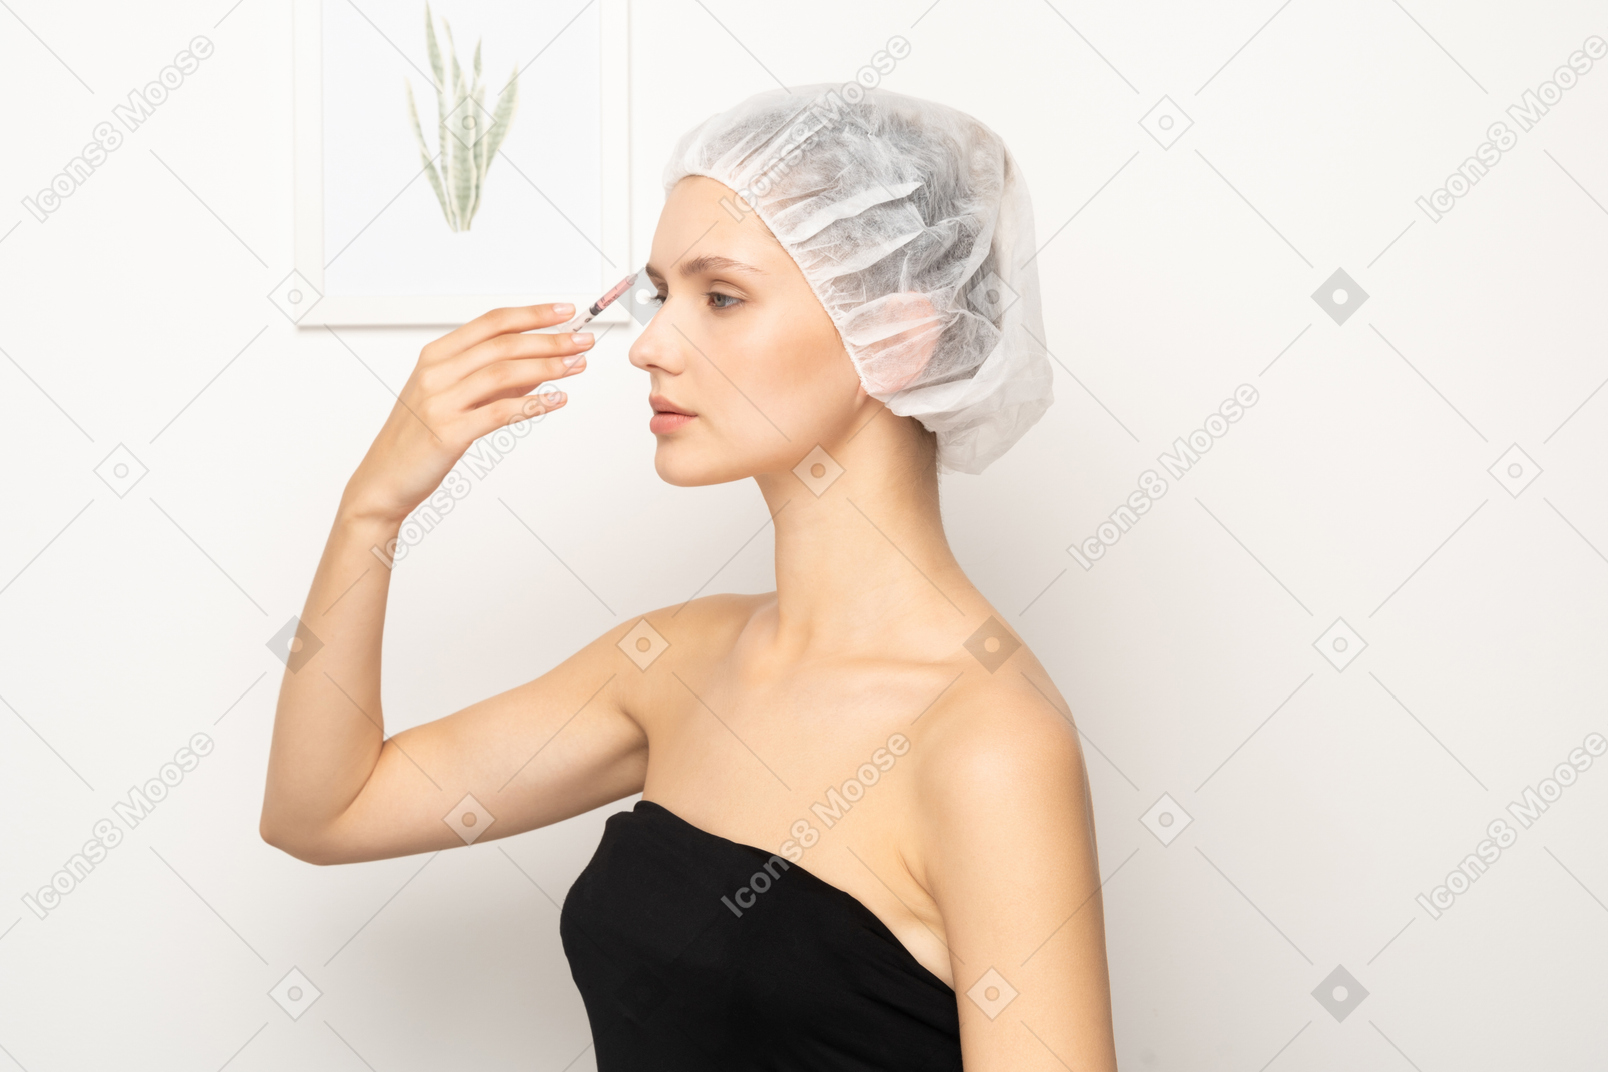 Side view of a woman making injection to her face